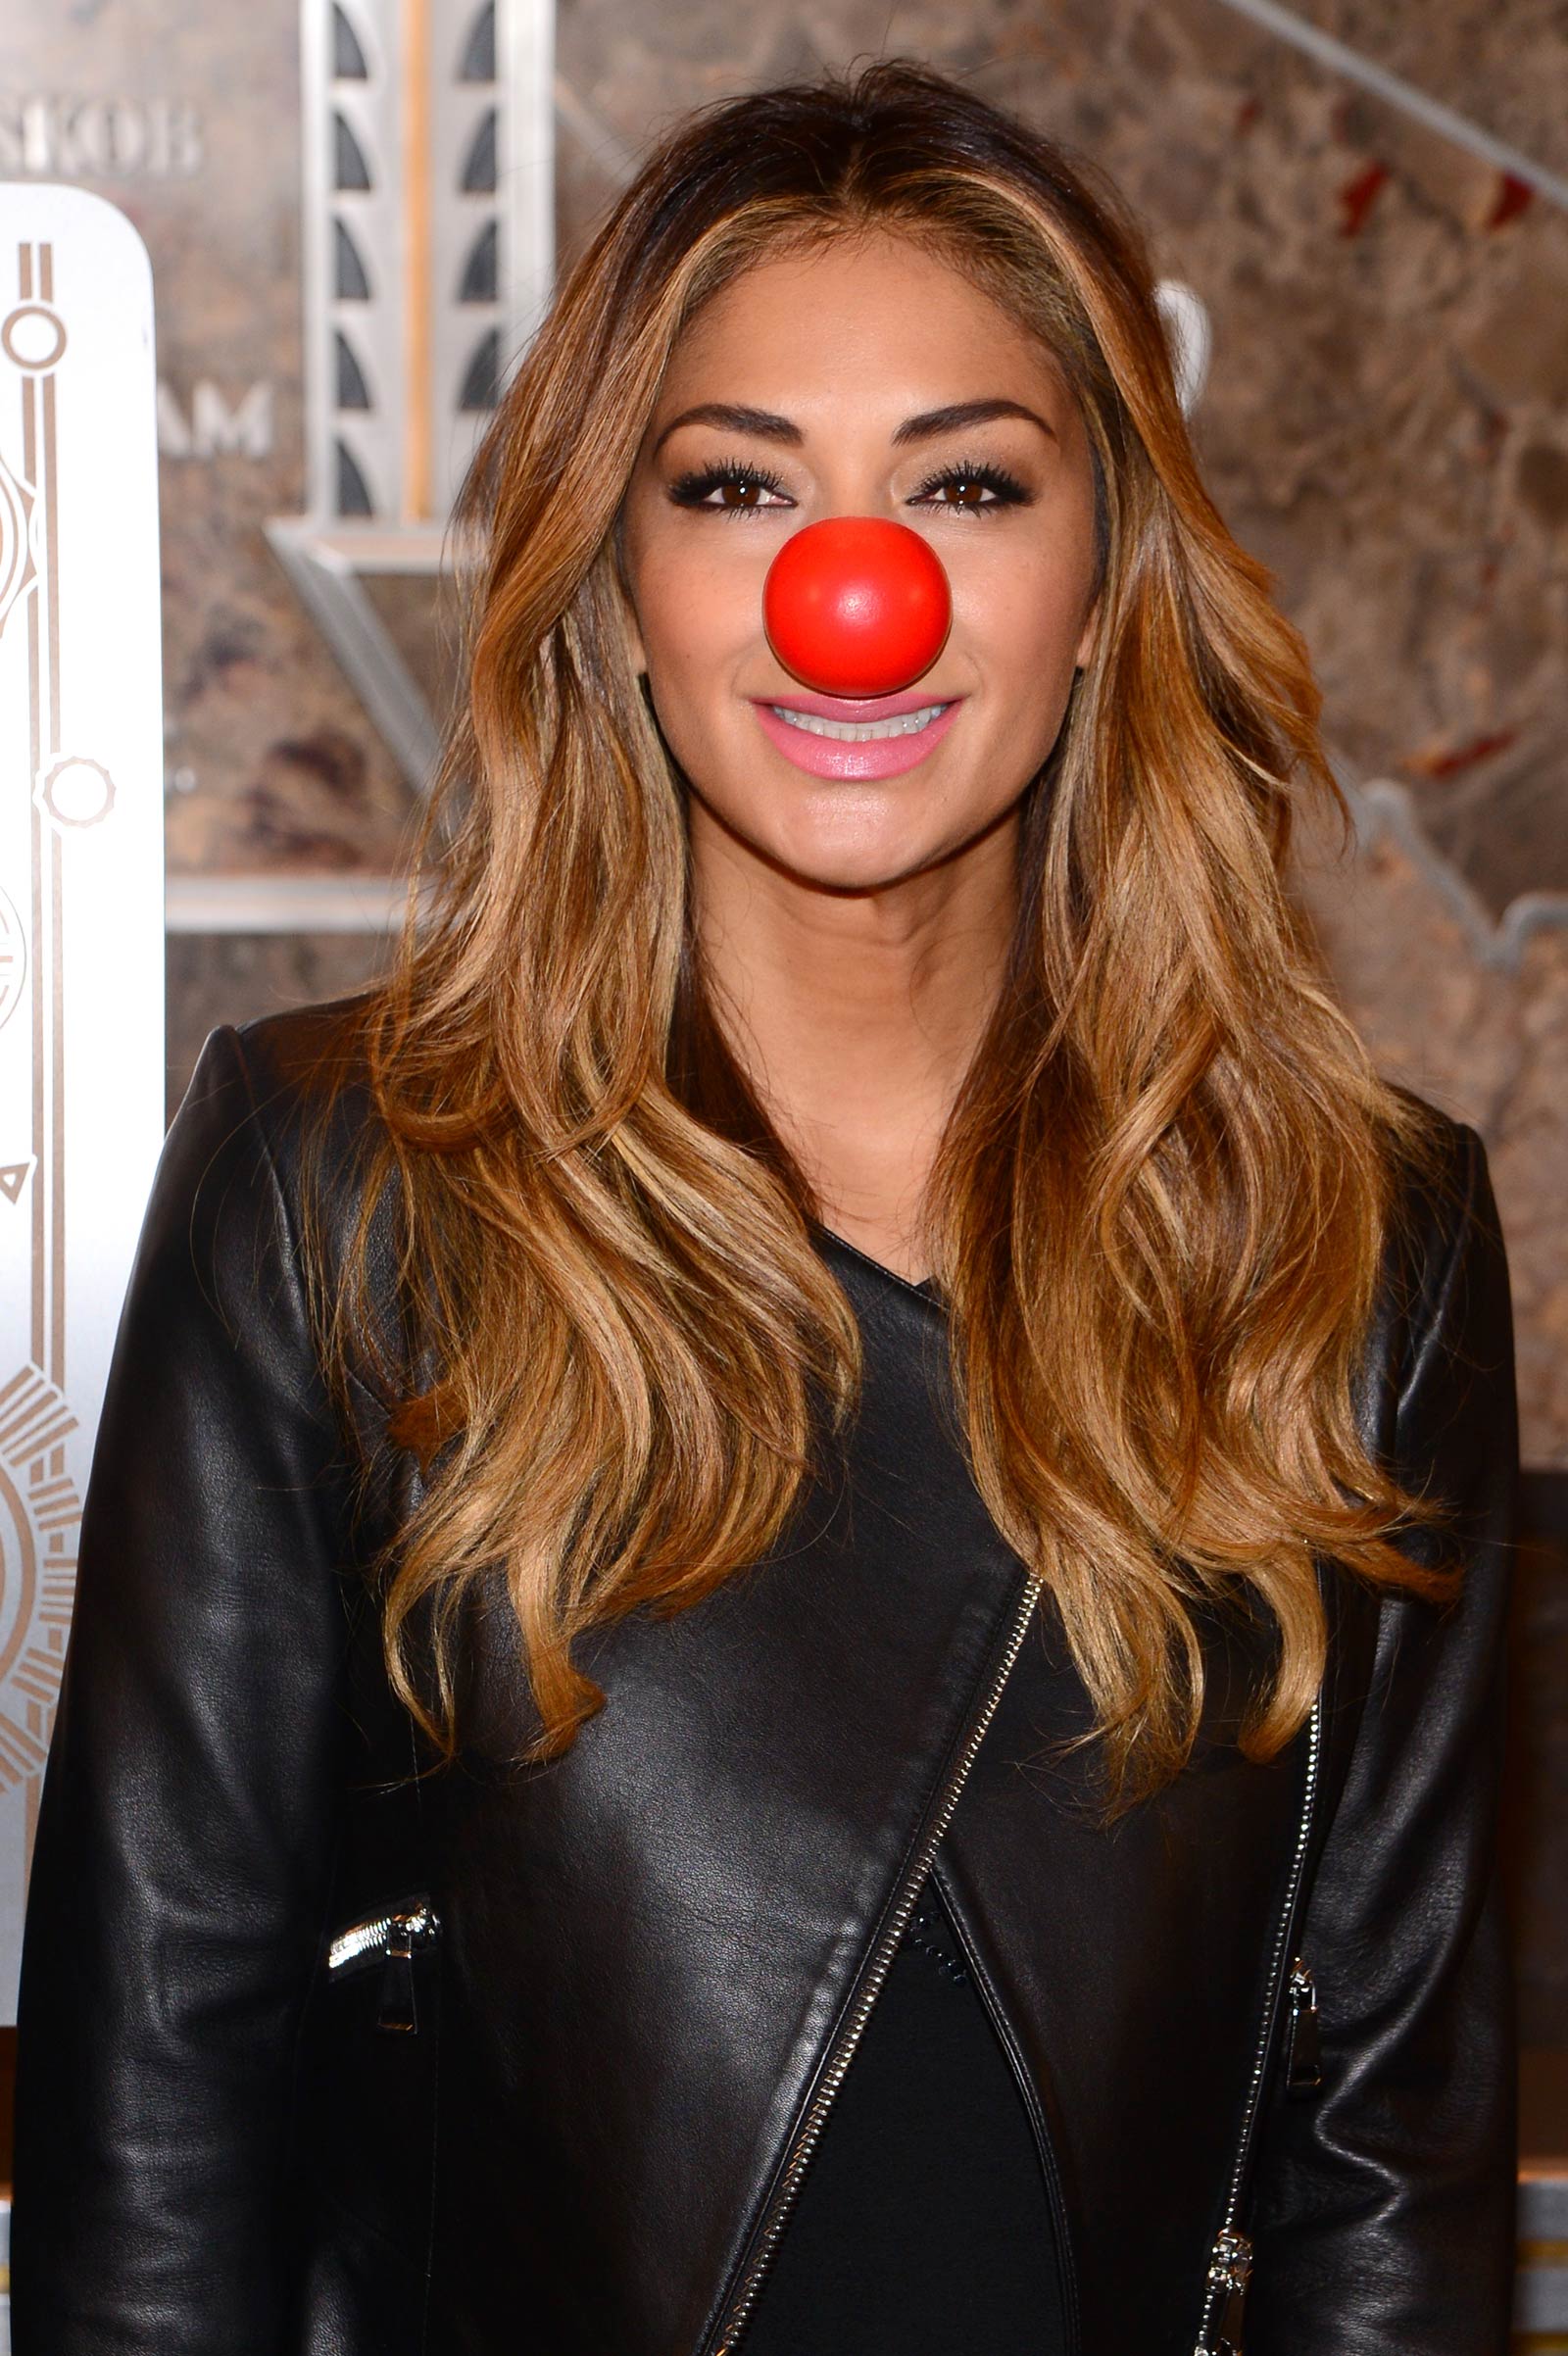 Nicole Scherzinger at Empire State Building celebrating Red Nose Day